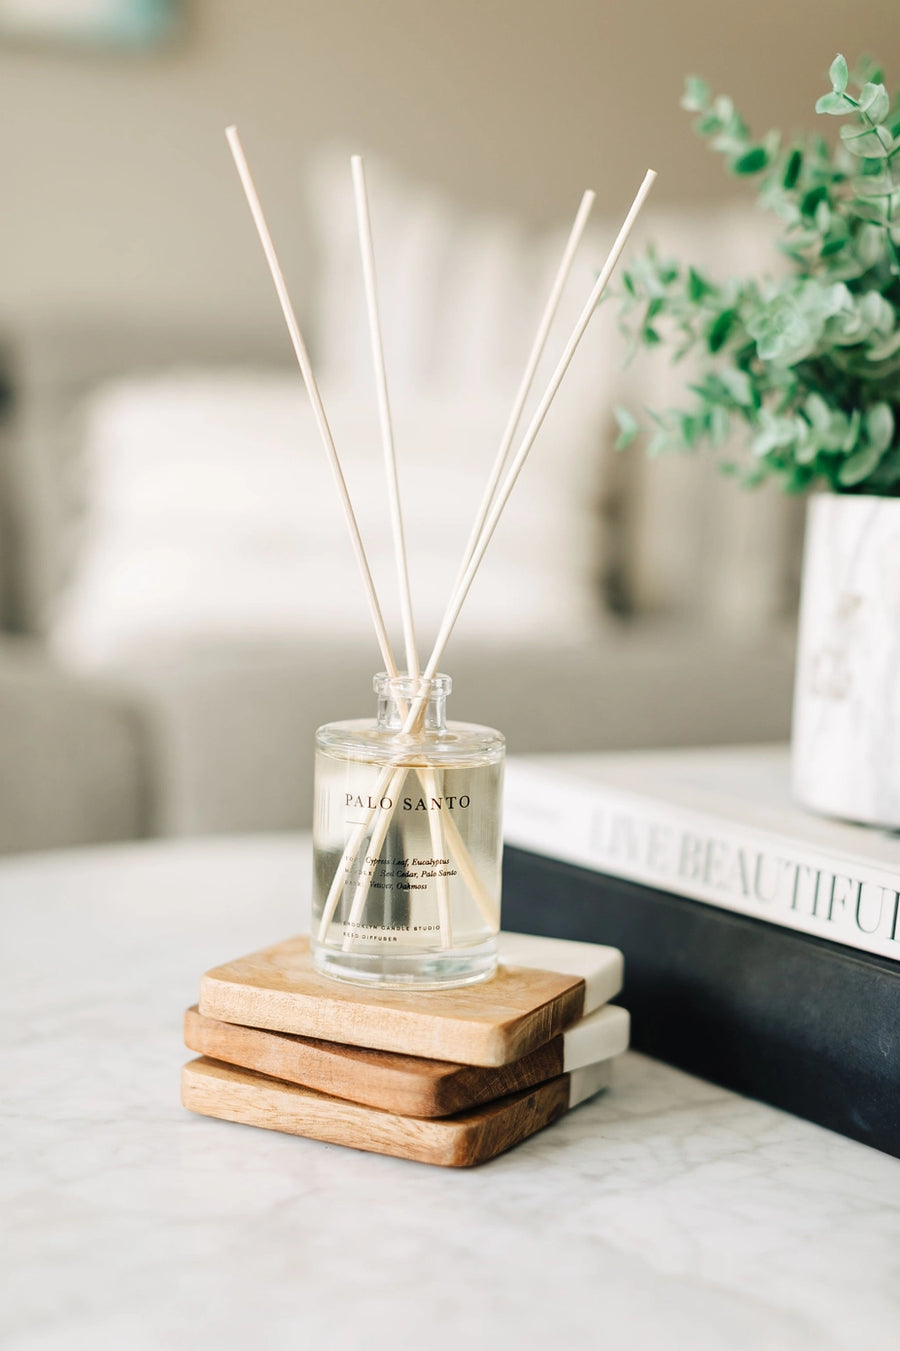 The Palo Santo Reed Diffuser by Brooklyn Candle Studio